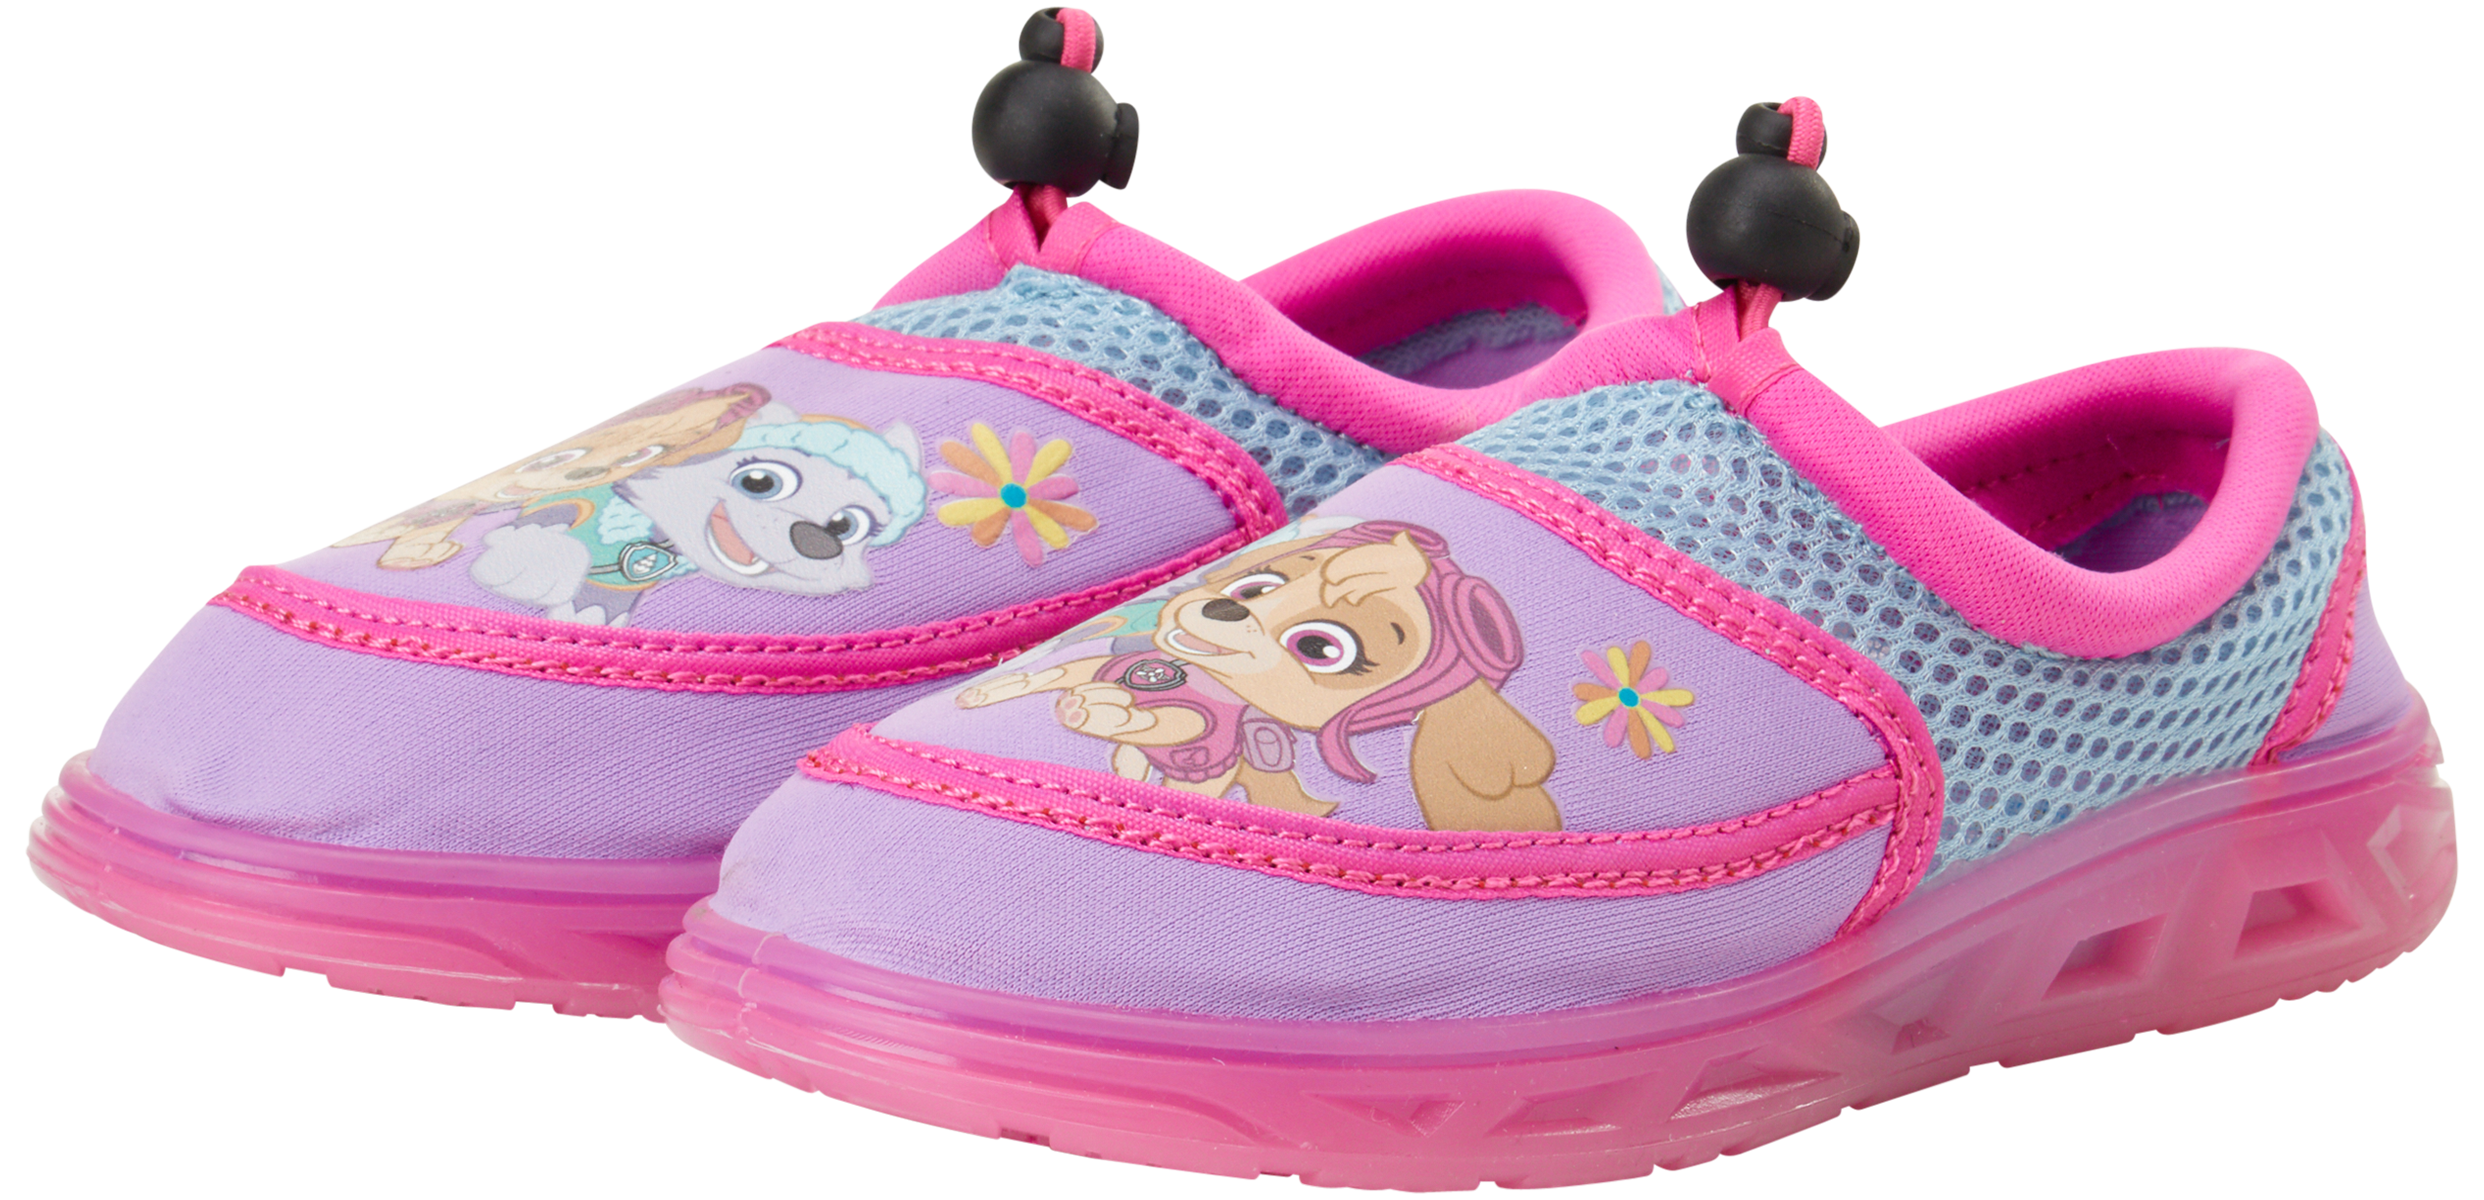 GIRLS NEWTZ WATER SHOES SIZE 11/12 Details about   NEW 